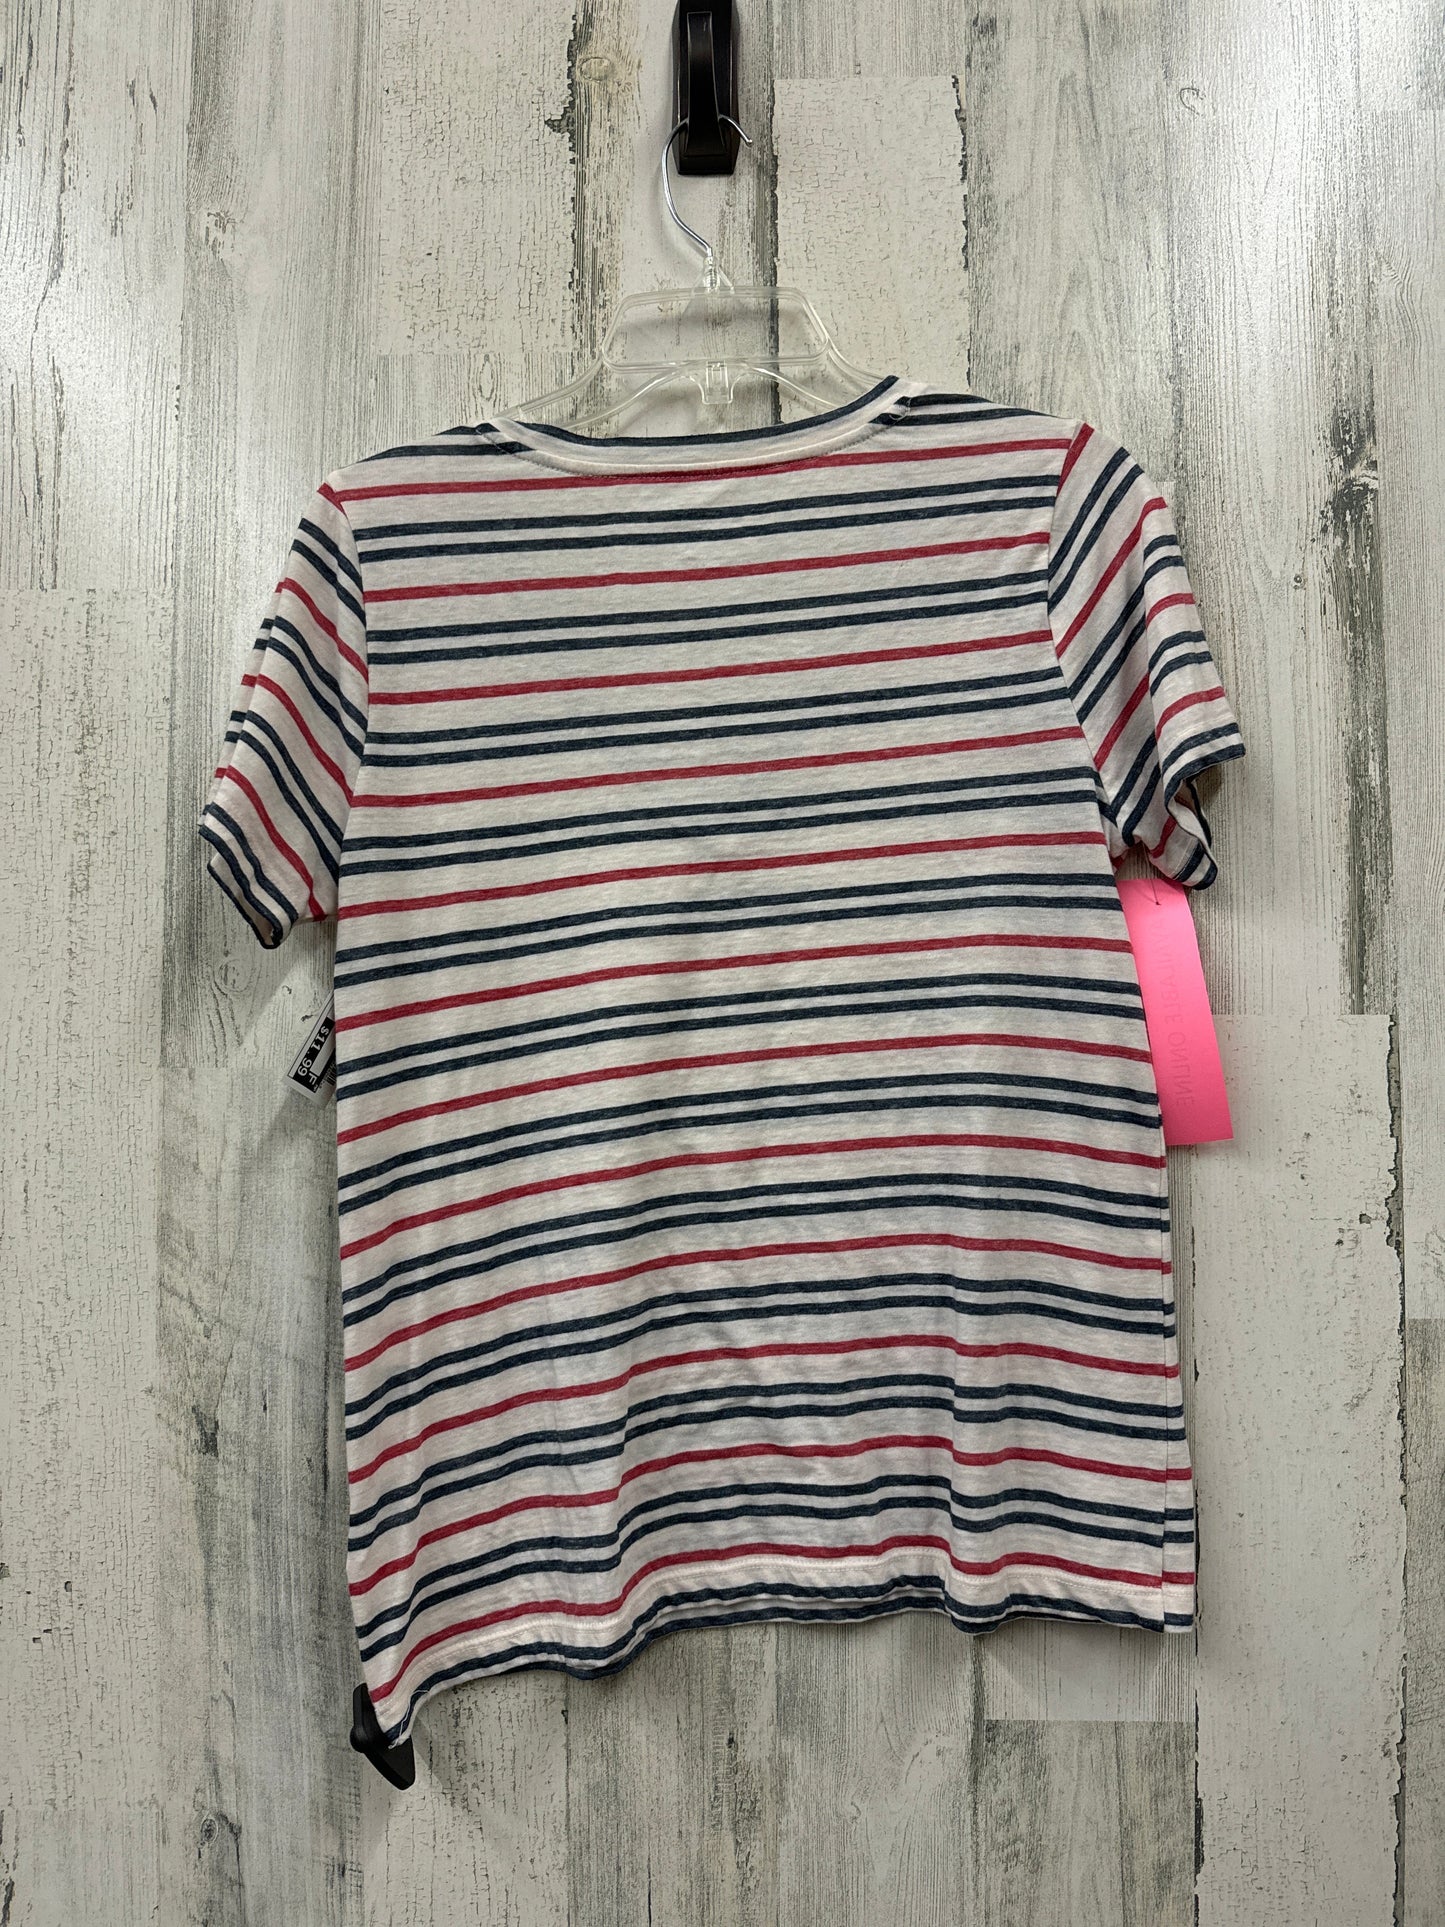 White Top Short Sleeve Lucky Brand, Size M